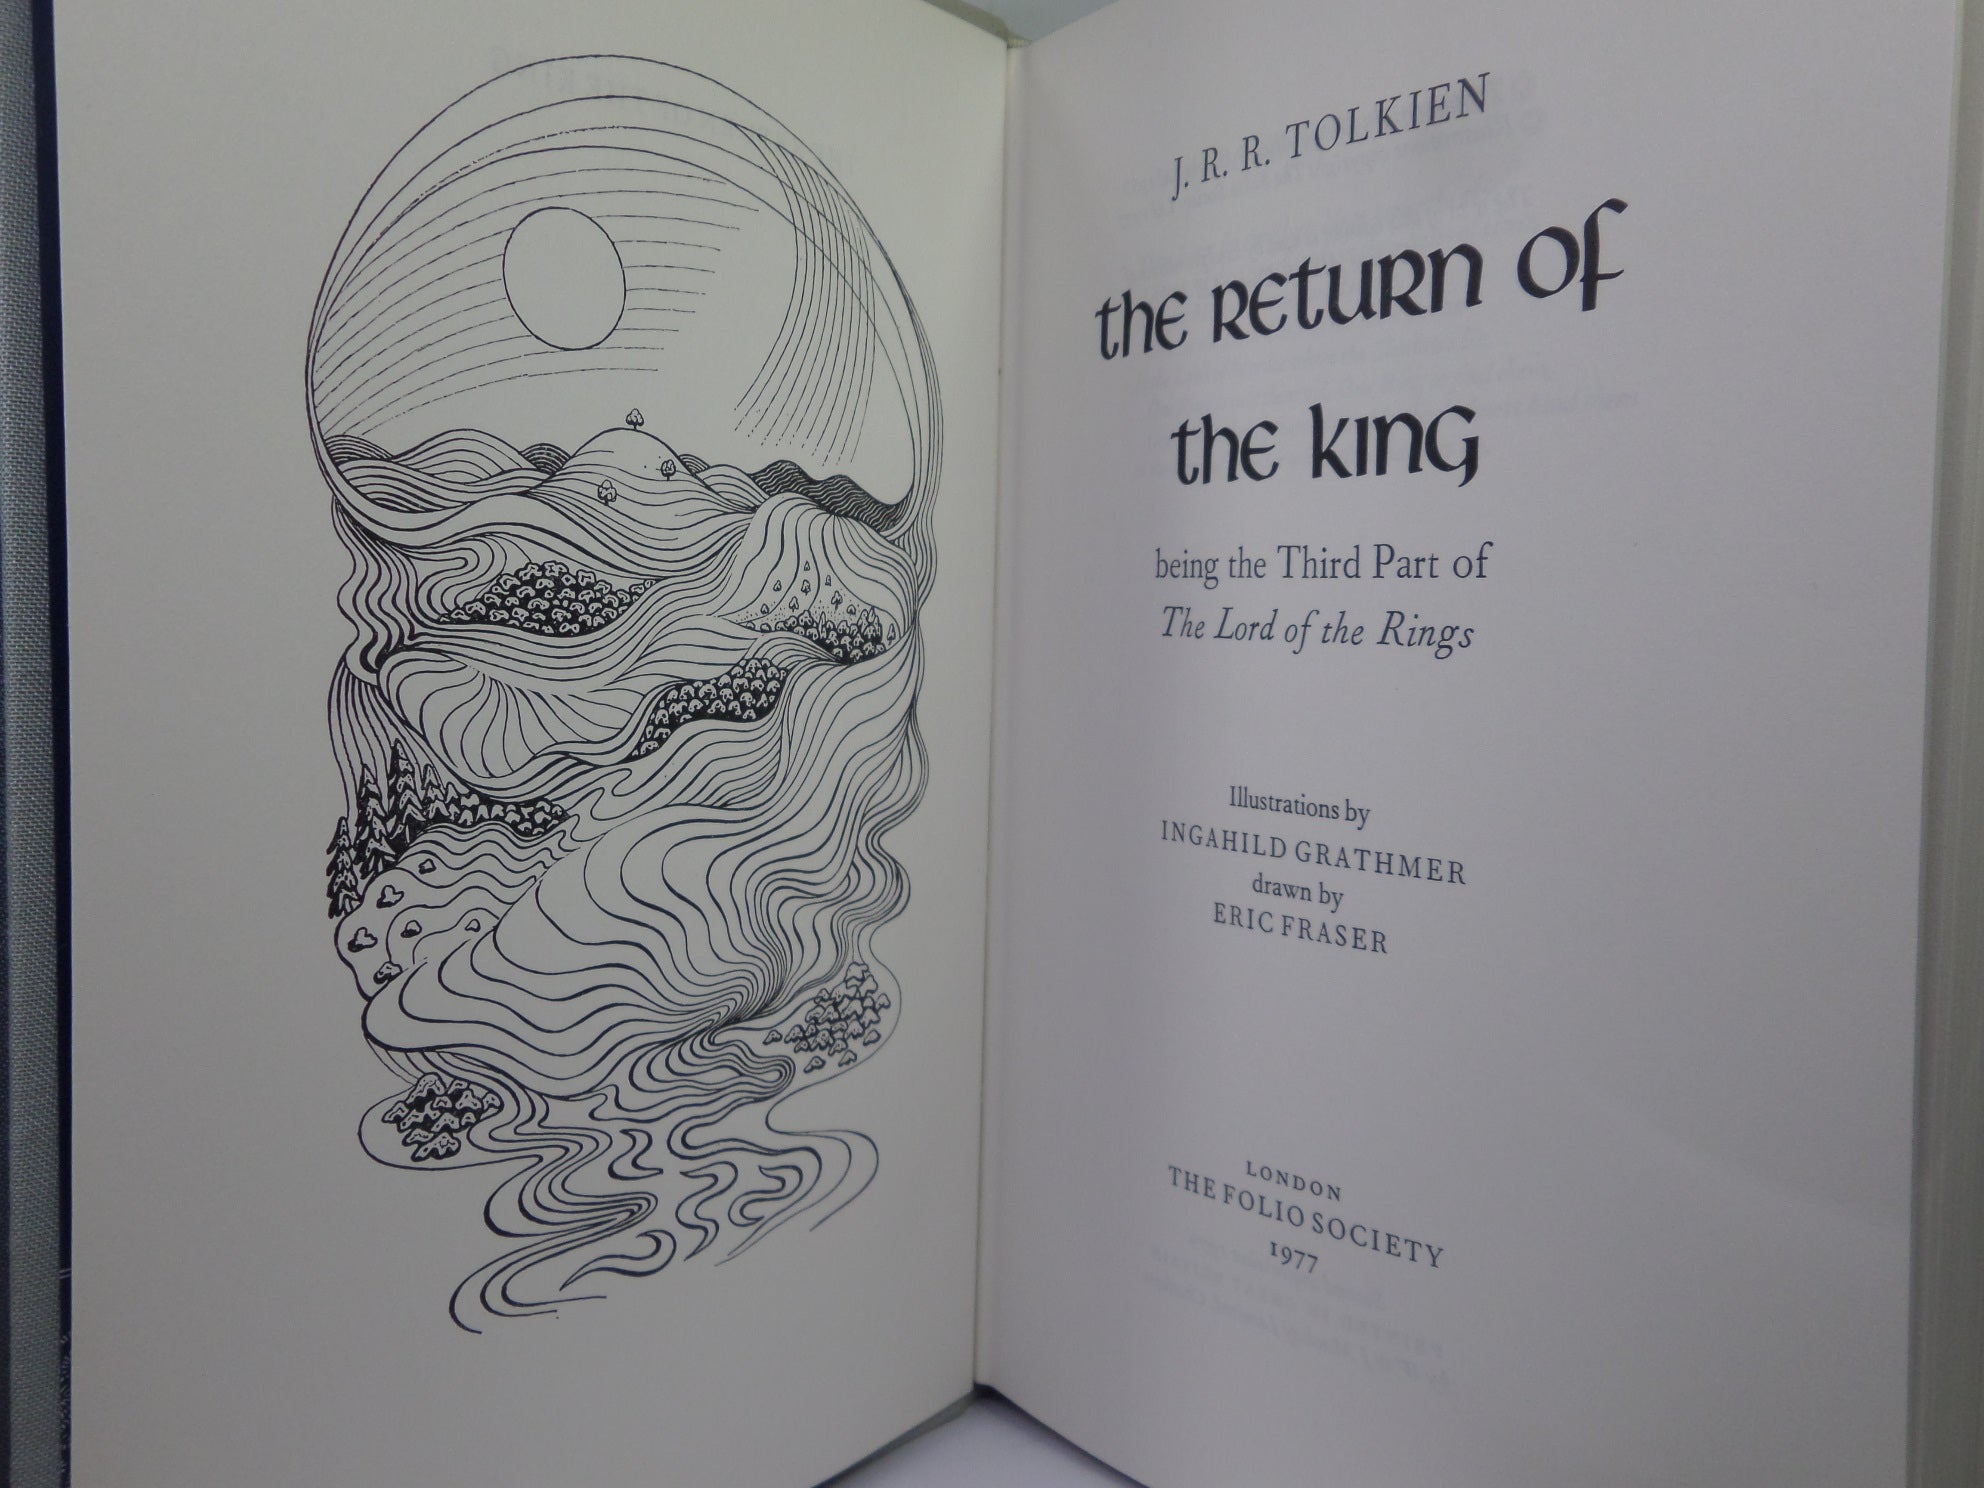 THE LORD OF THE RINGS BY J.R.R. TOLKIEN 1979 FOLIO SOCIETY EDITION